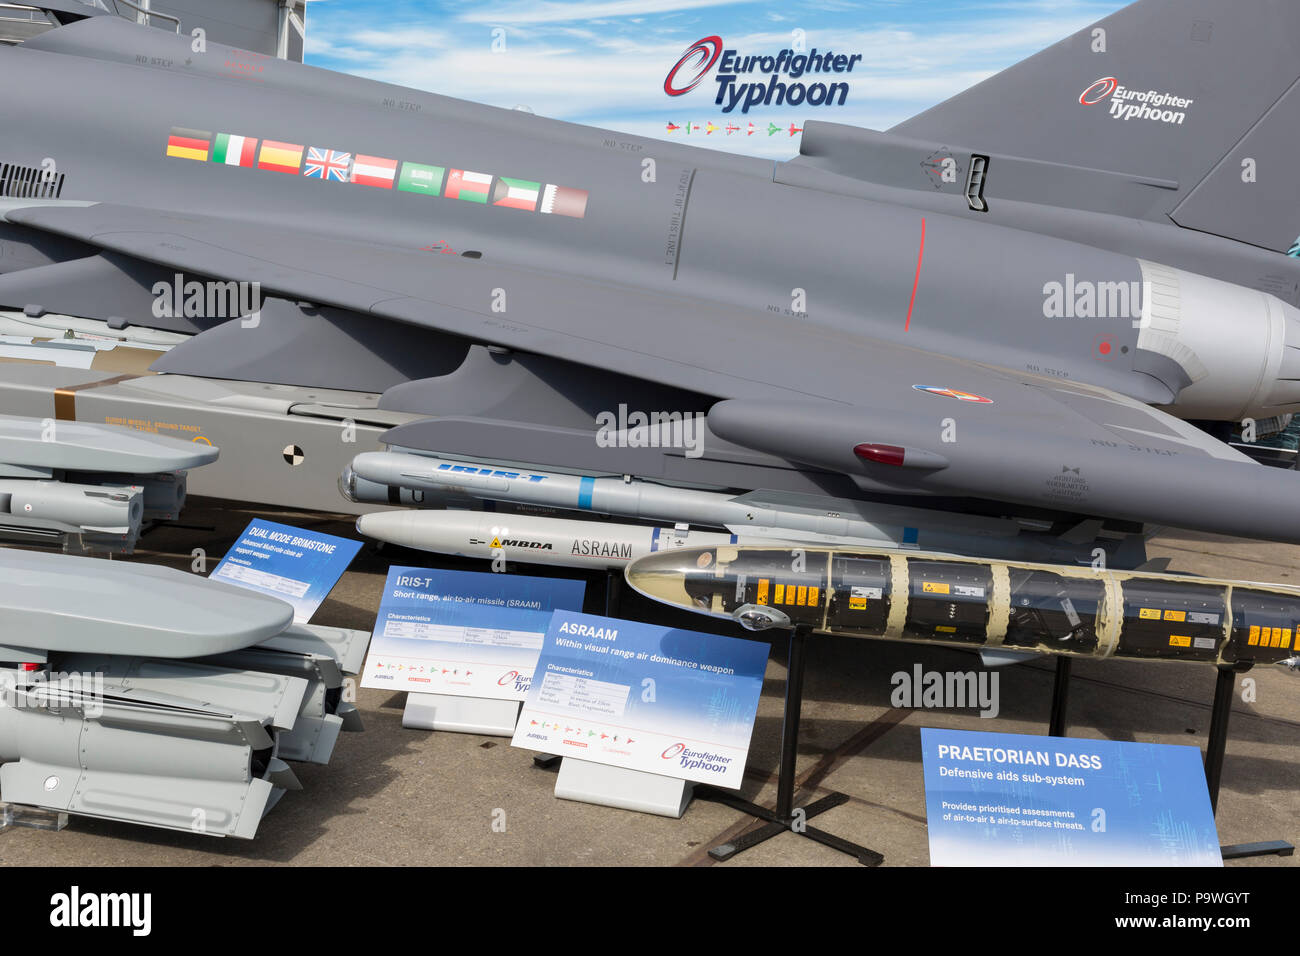 Missile systems for the BAE Systems Typhoon at the Farnborough Airshow, on 16th July 2018, in Farnborough, England. Stock Photo